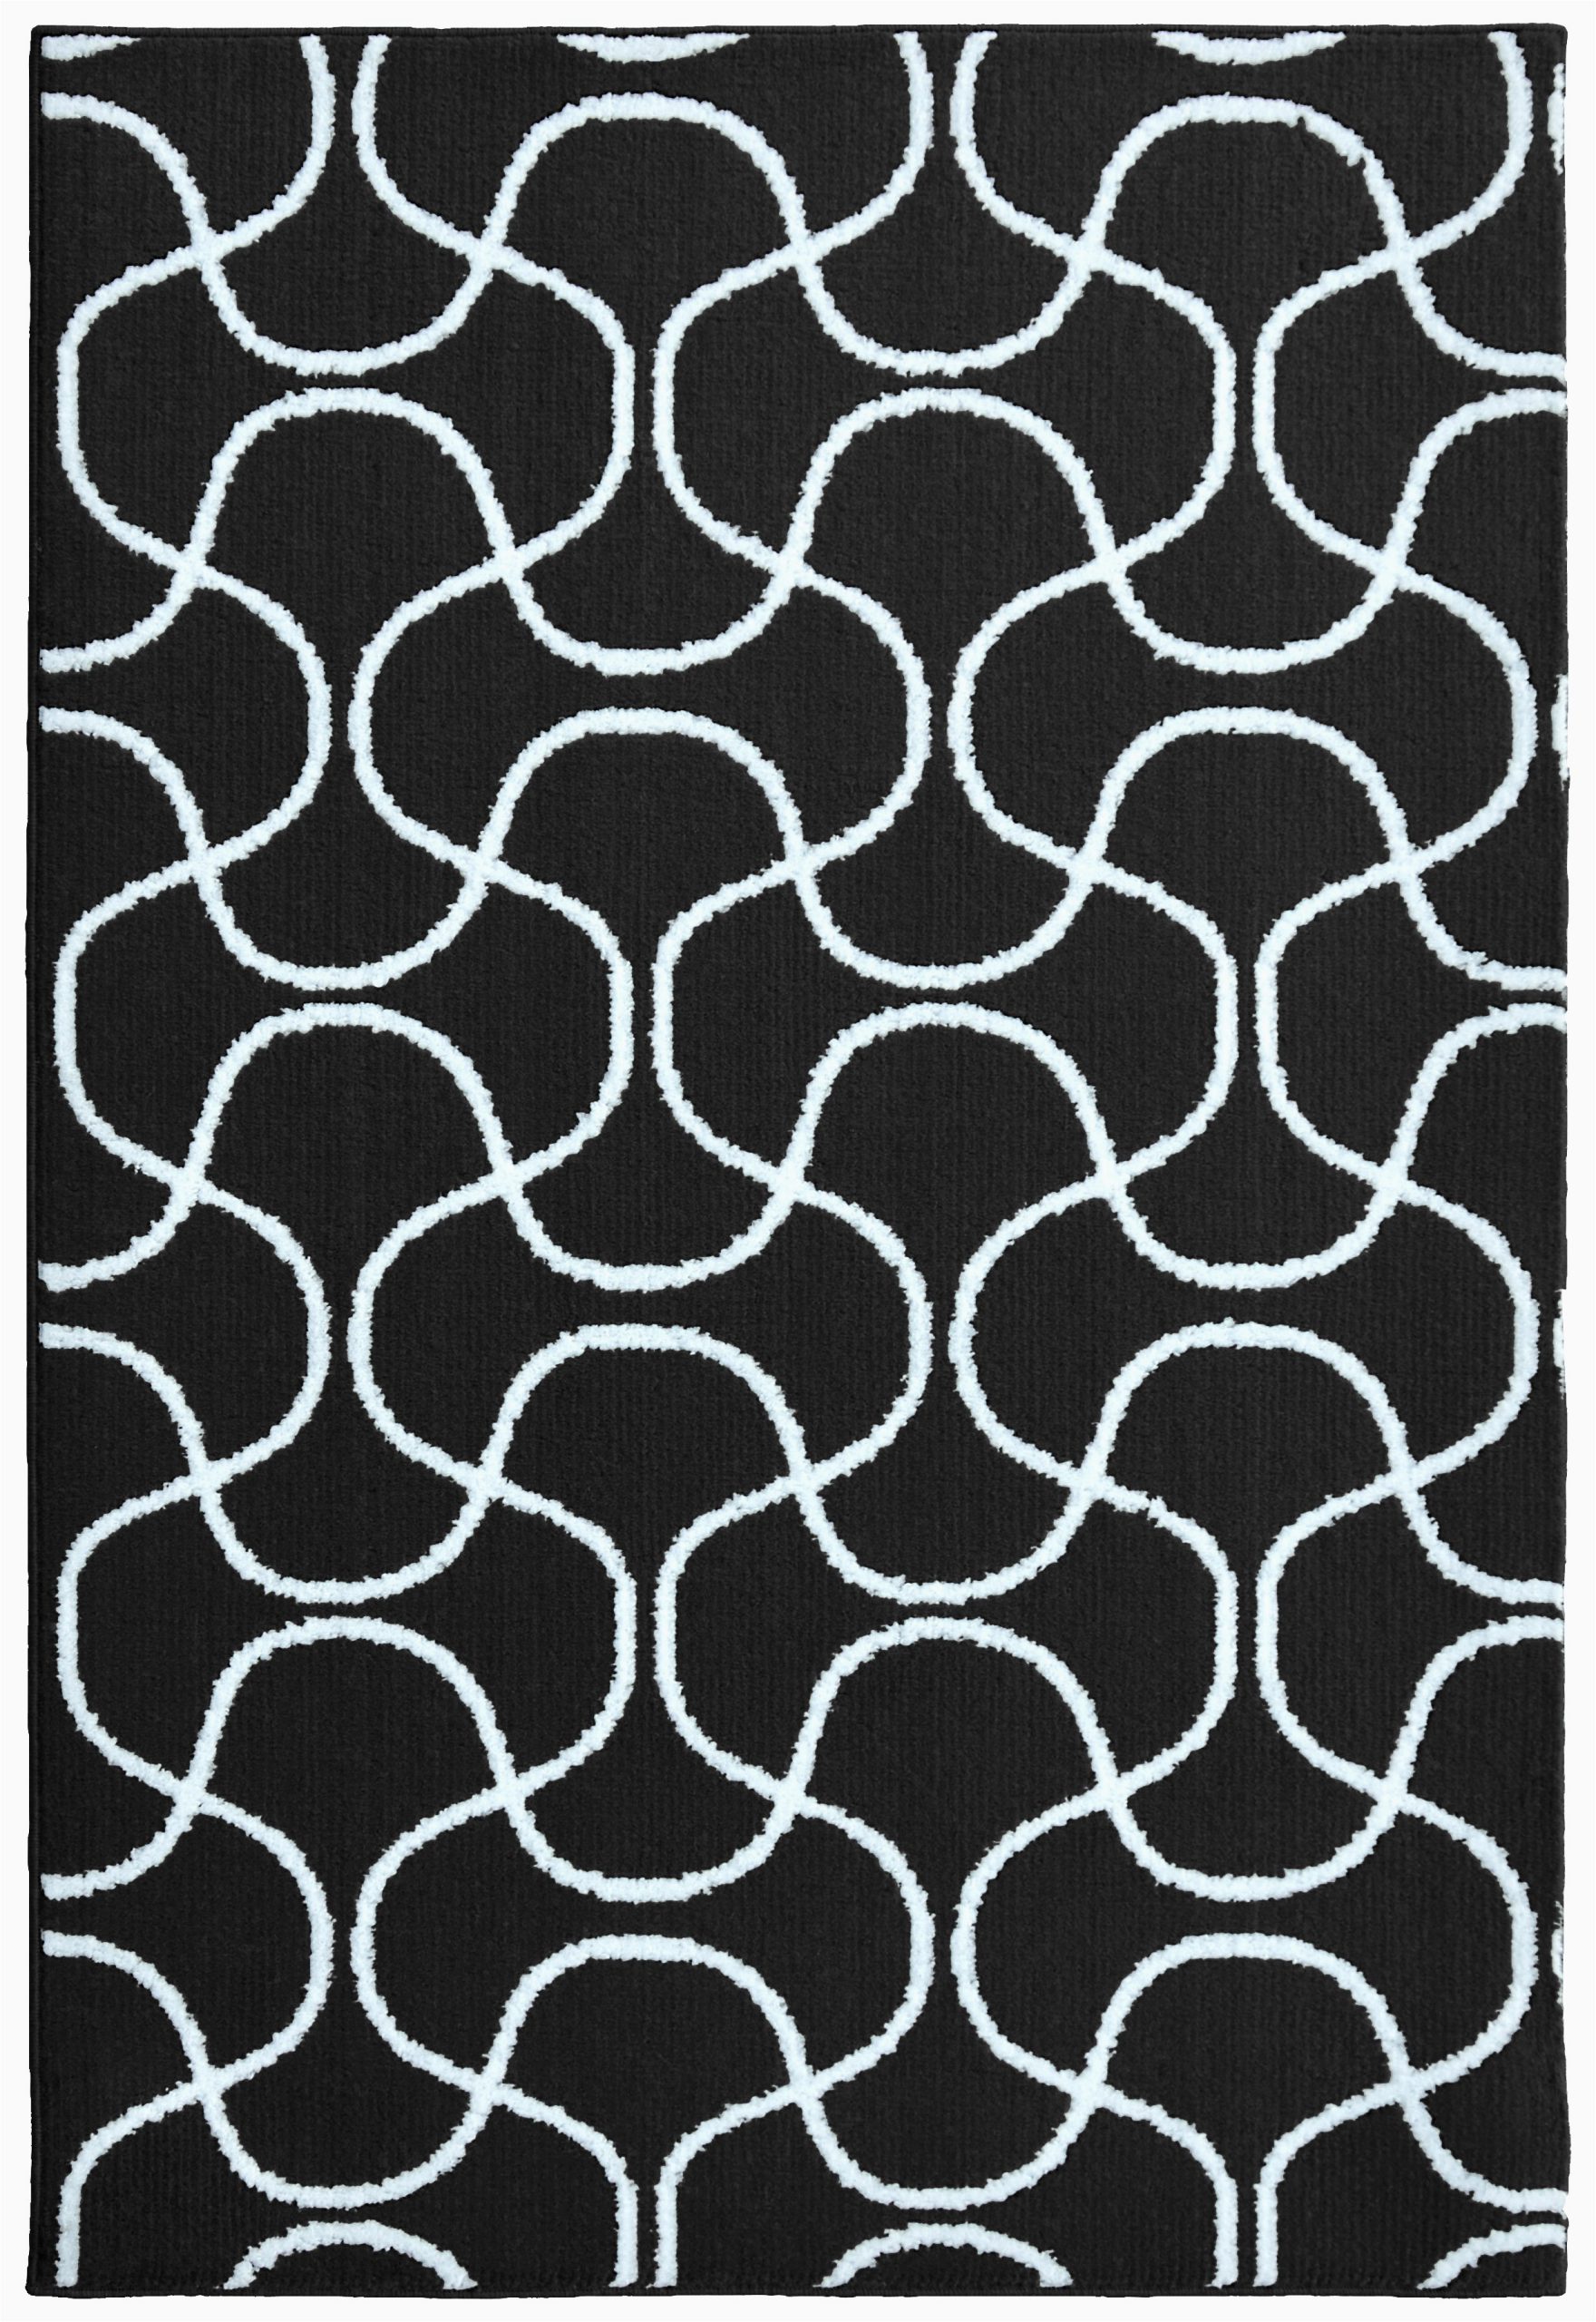 Mainstays Polyester solid Textured Shag area Rug and Runner Collection Mainstays solid Olefin Shag area Rug or Runner Collection